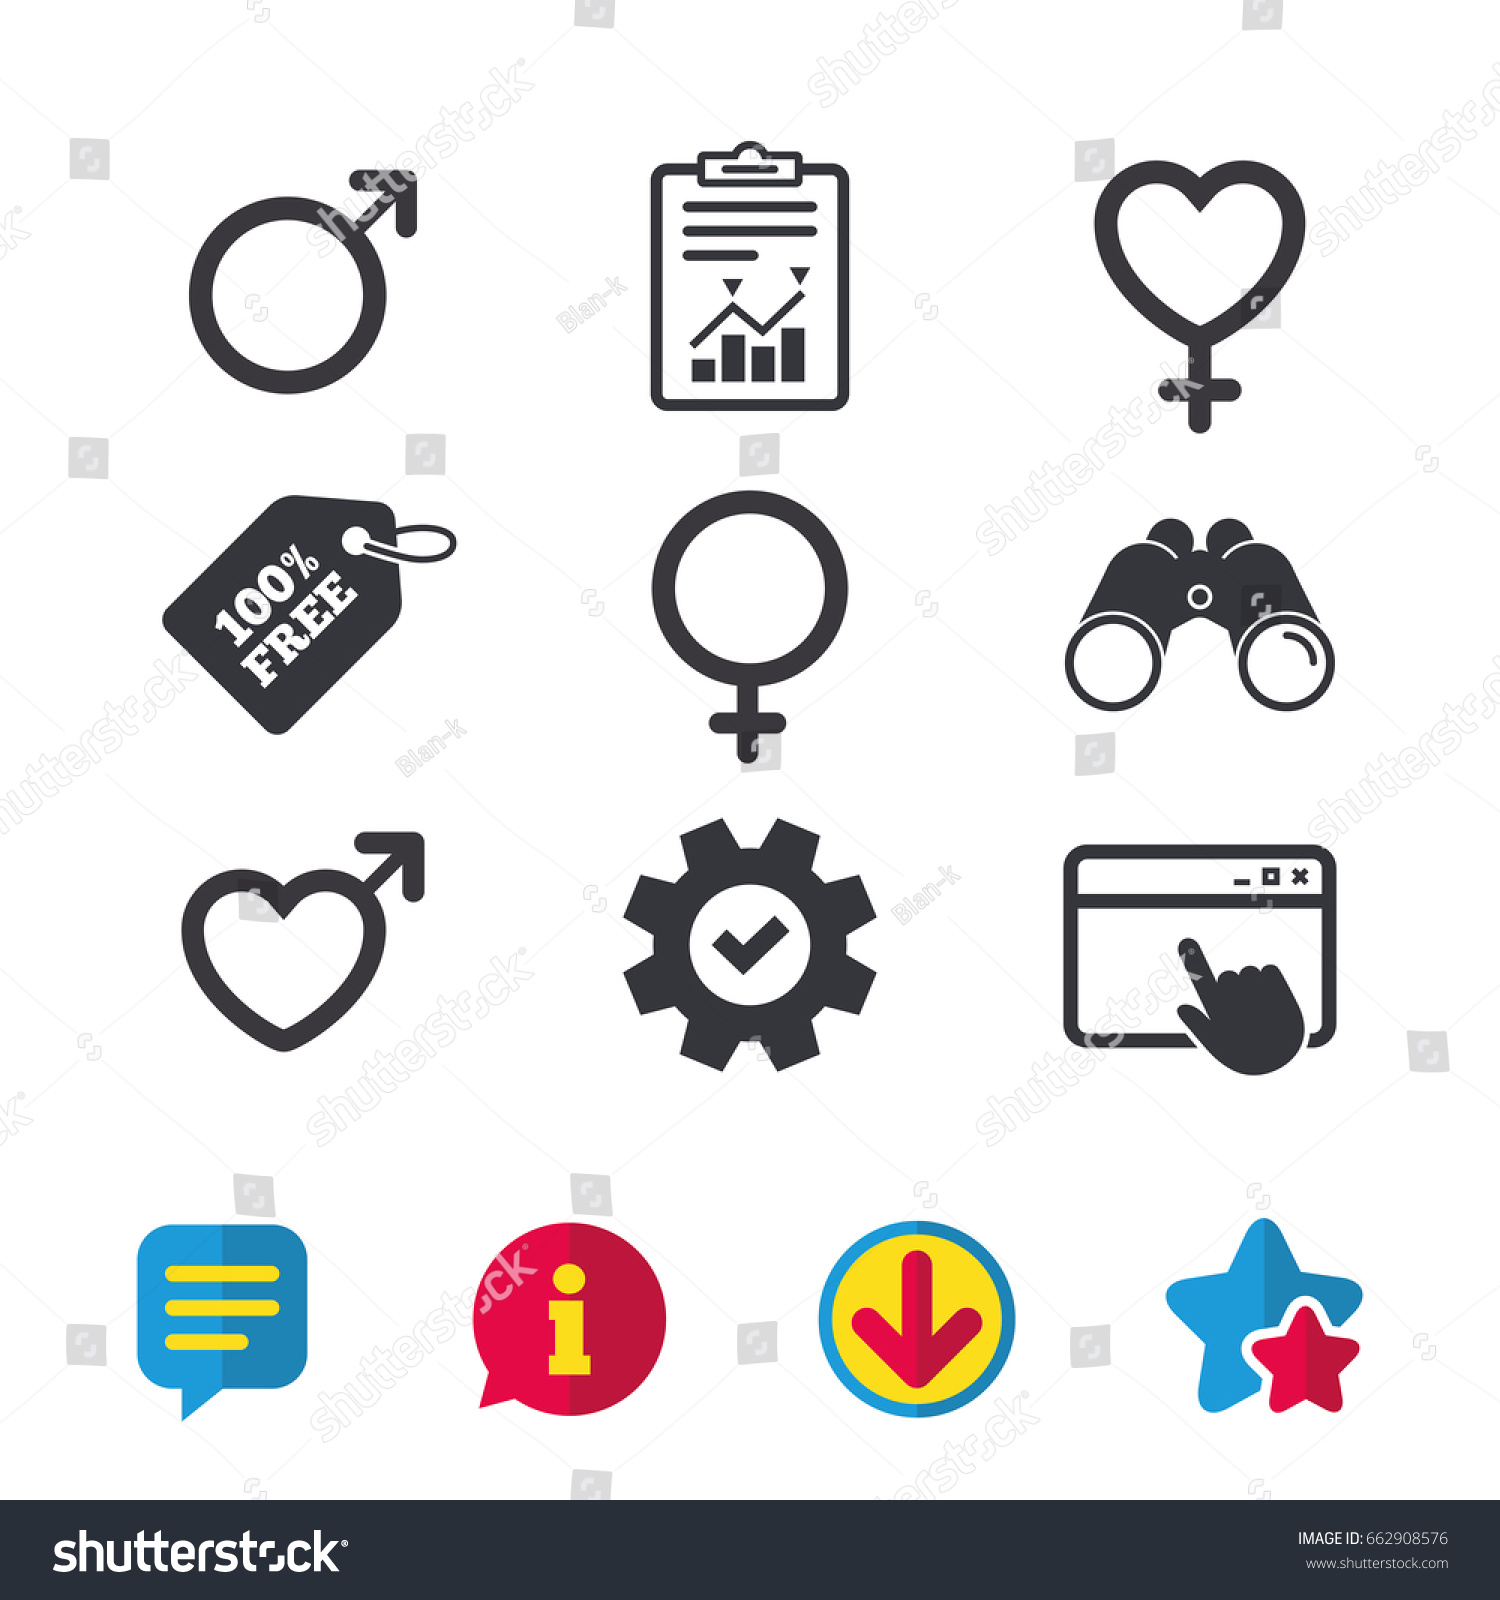 Male Female Sex Icons Man Woman Stock Vector Royalty Free 662908576 Shutterstock 